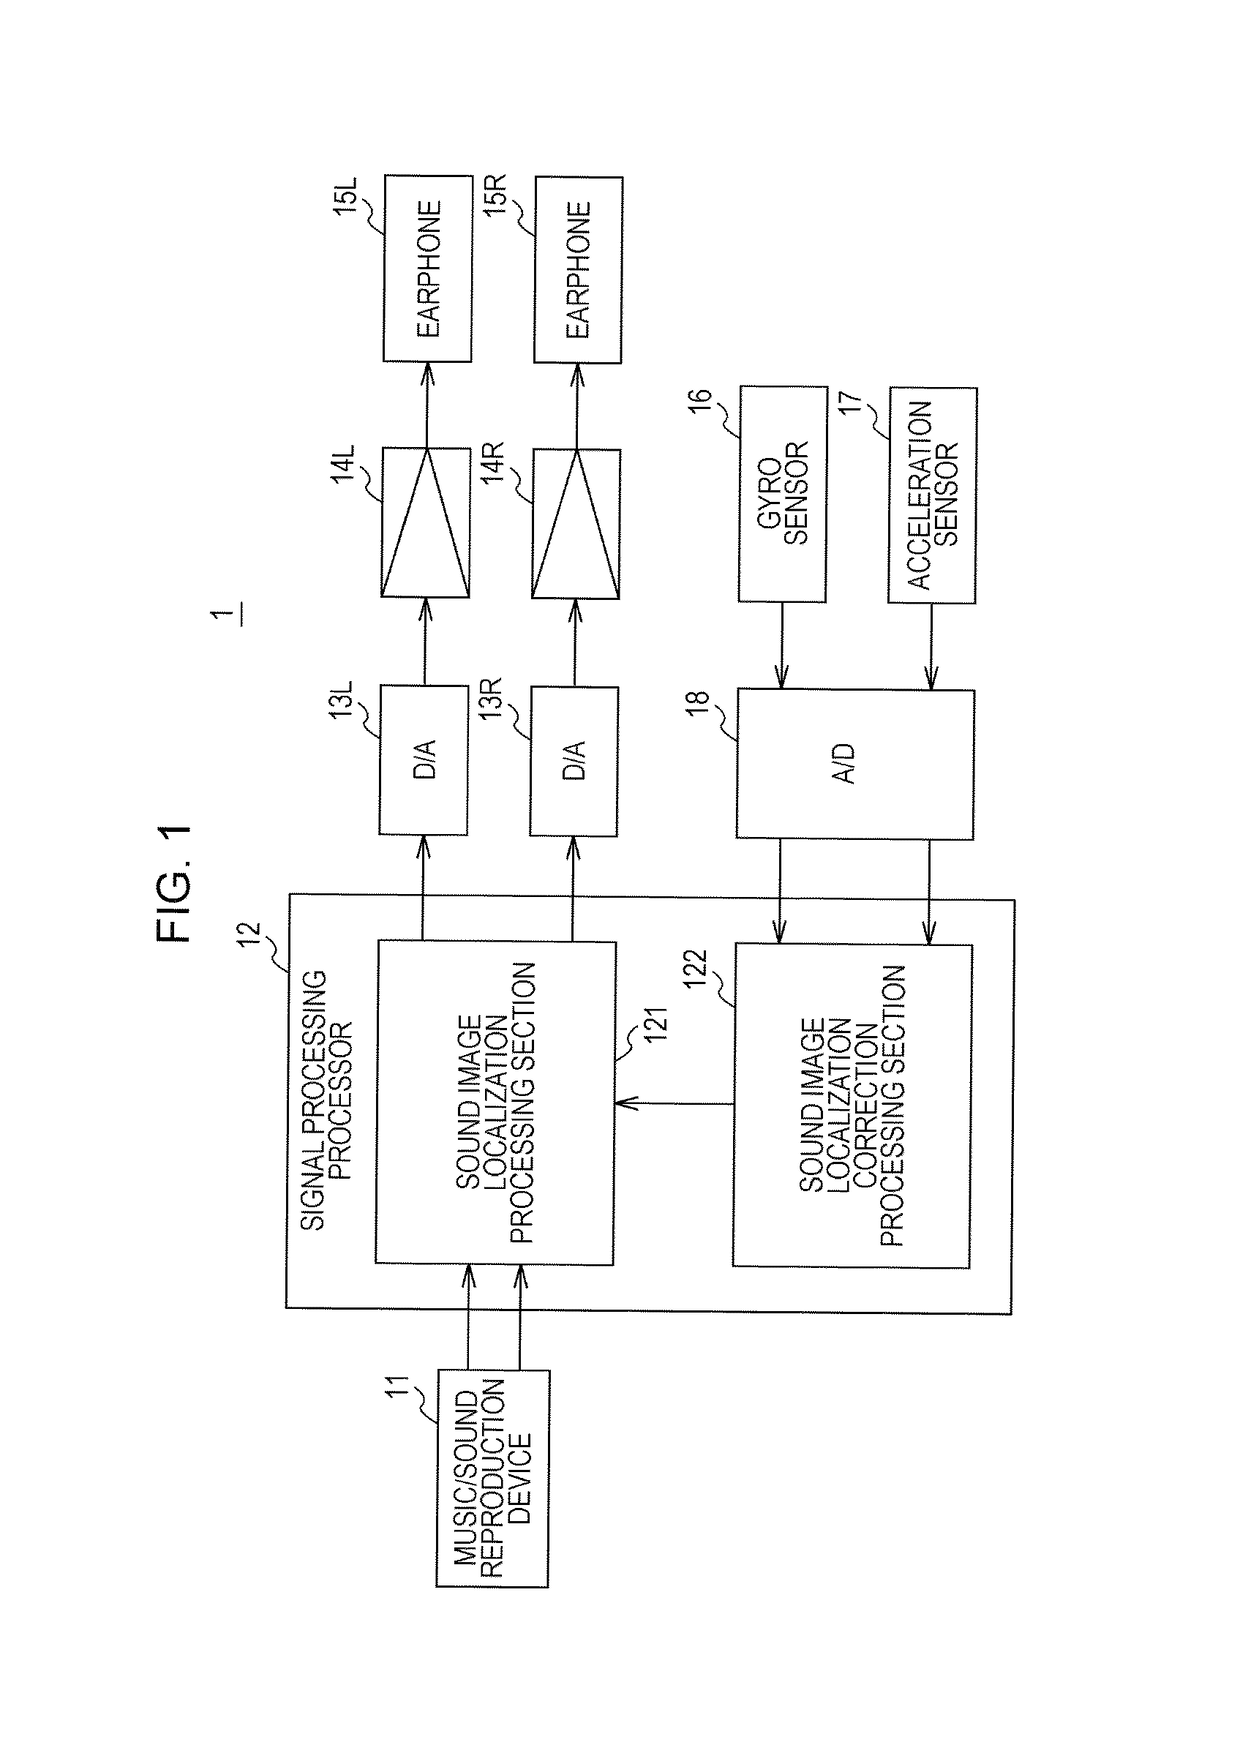 Sound processing apparatus, sound image localized position adjustment method, video processing apparatus, and video processing method